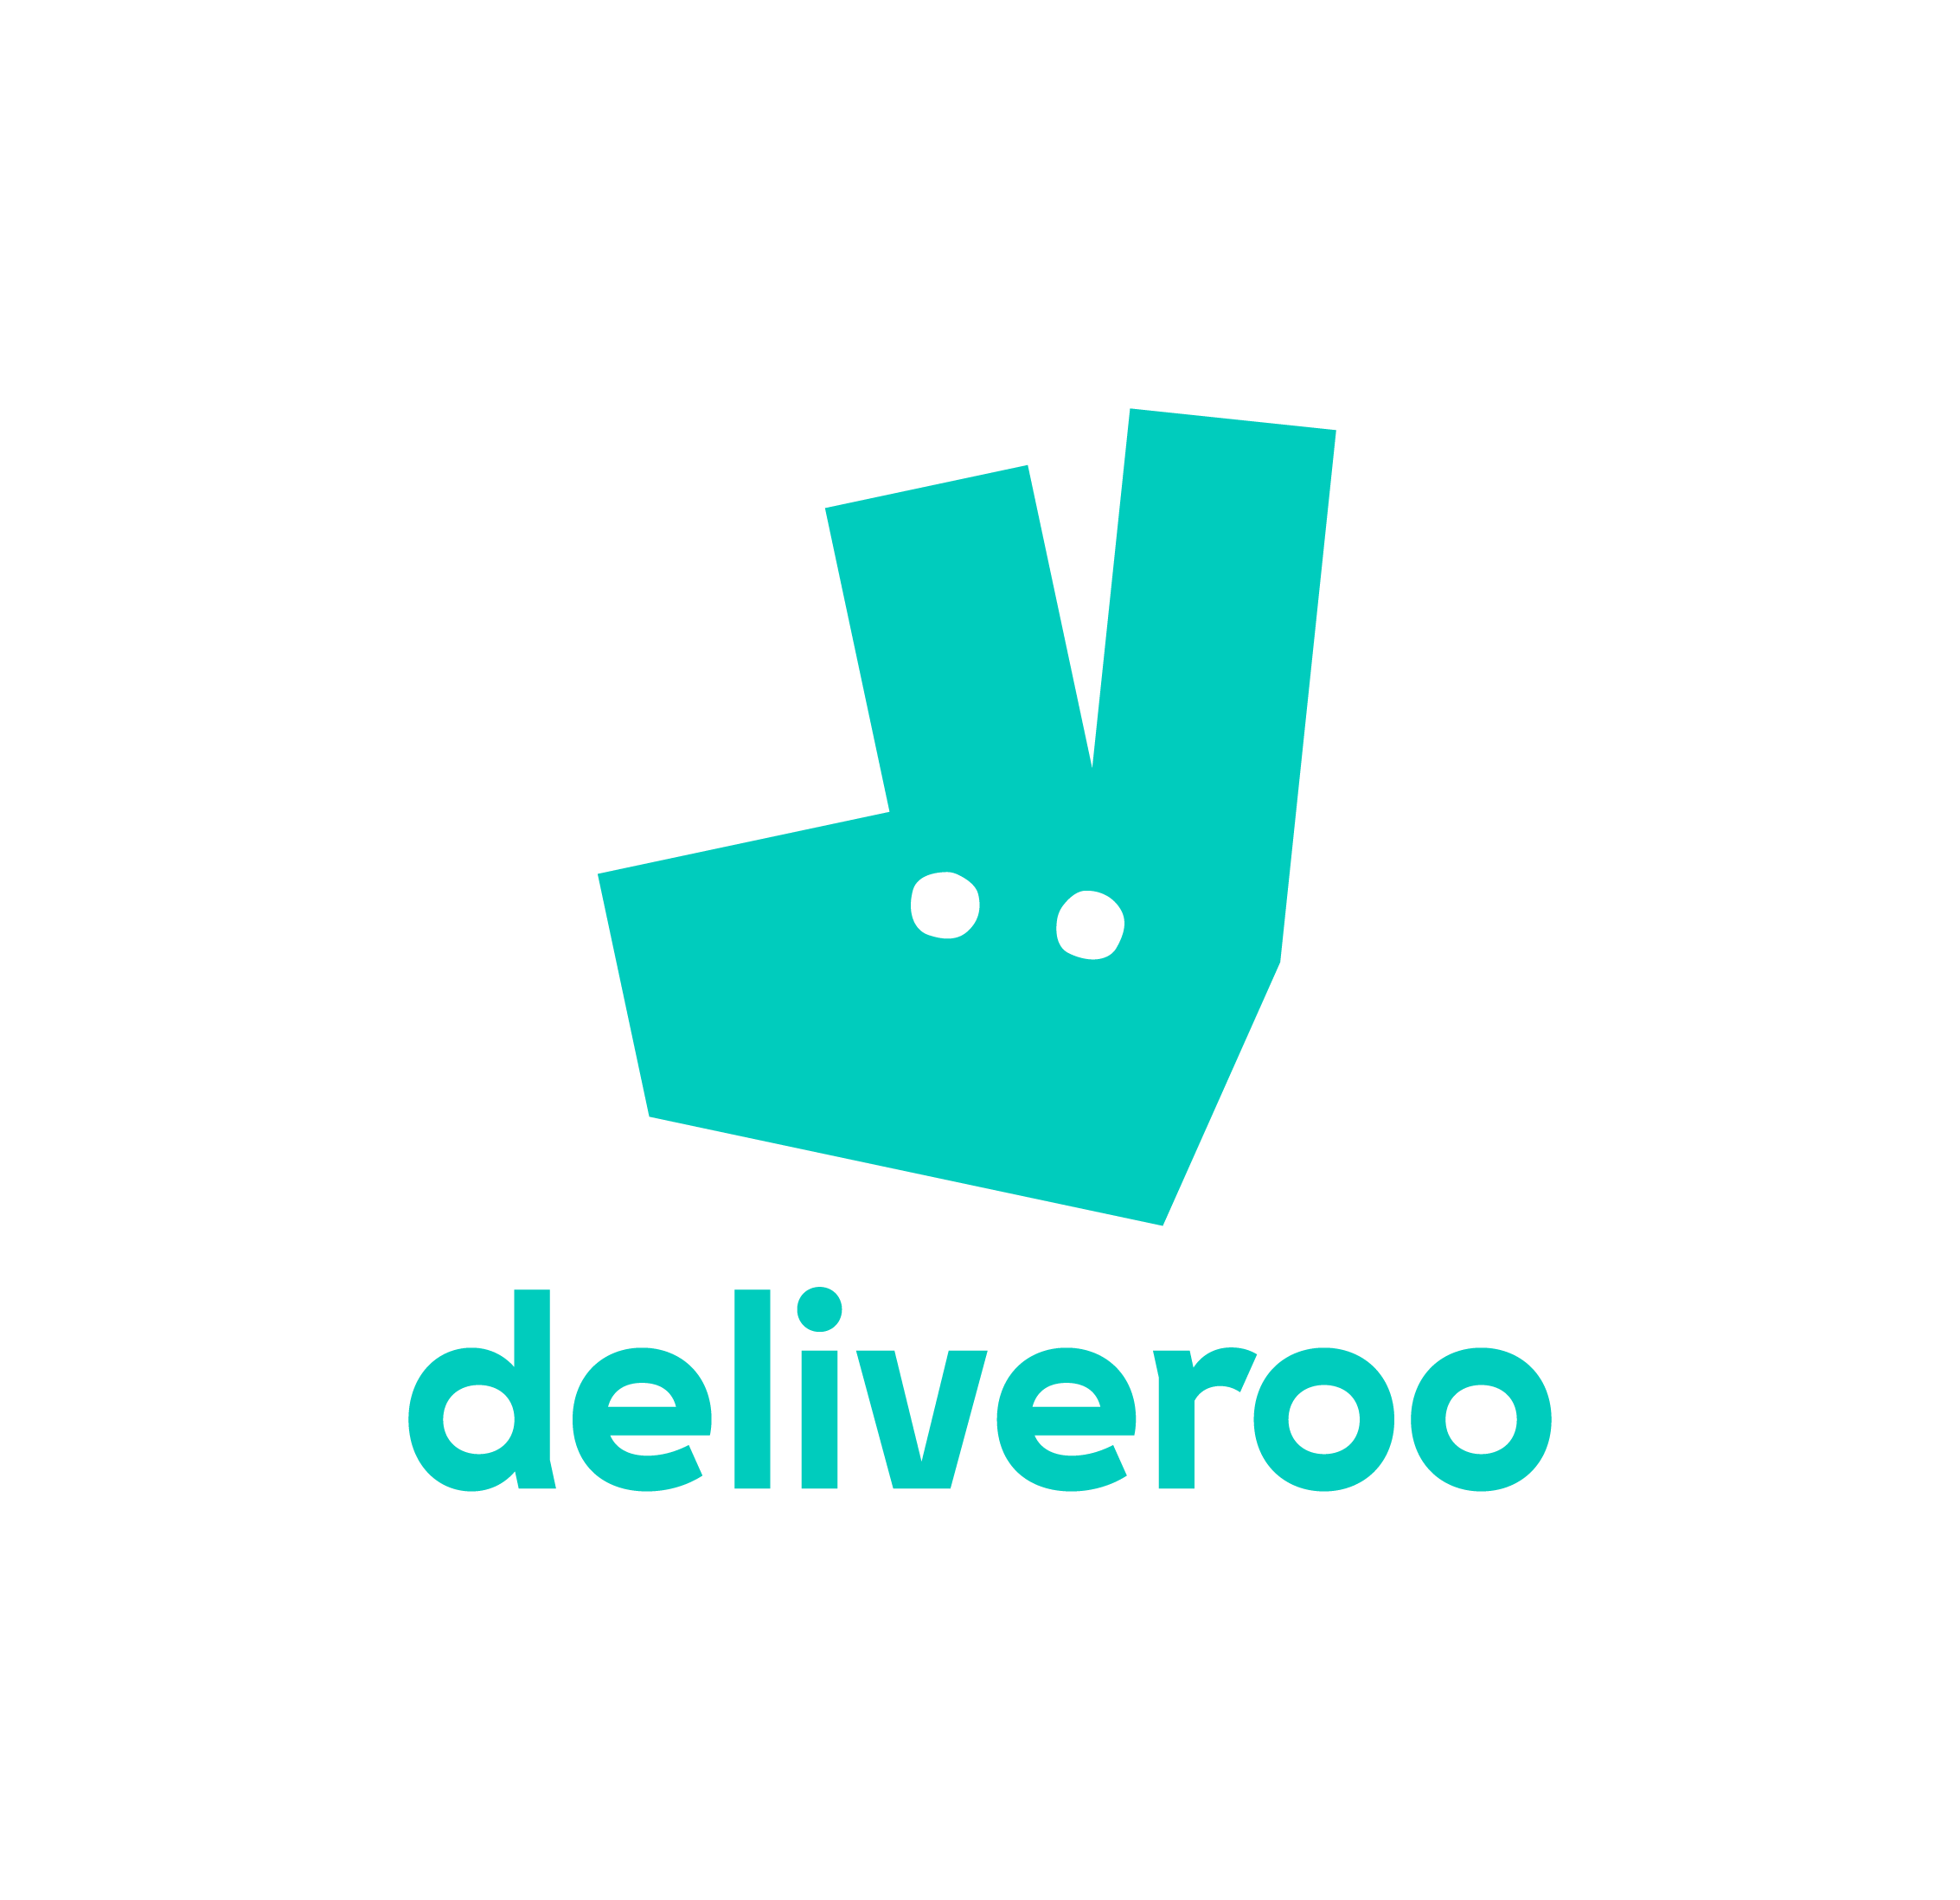 Finchley Lido - Deliveroo